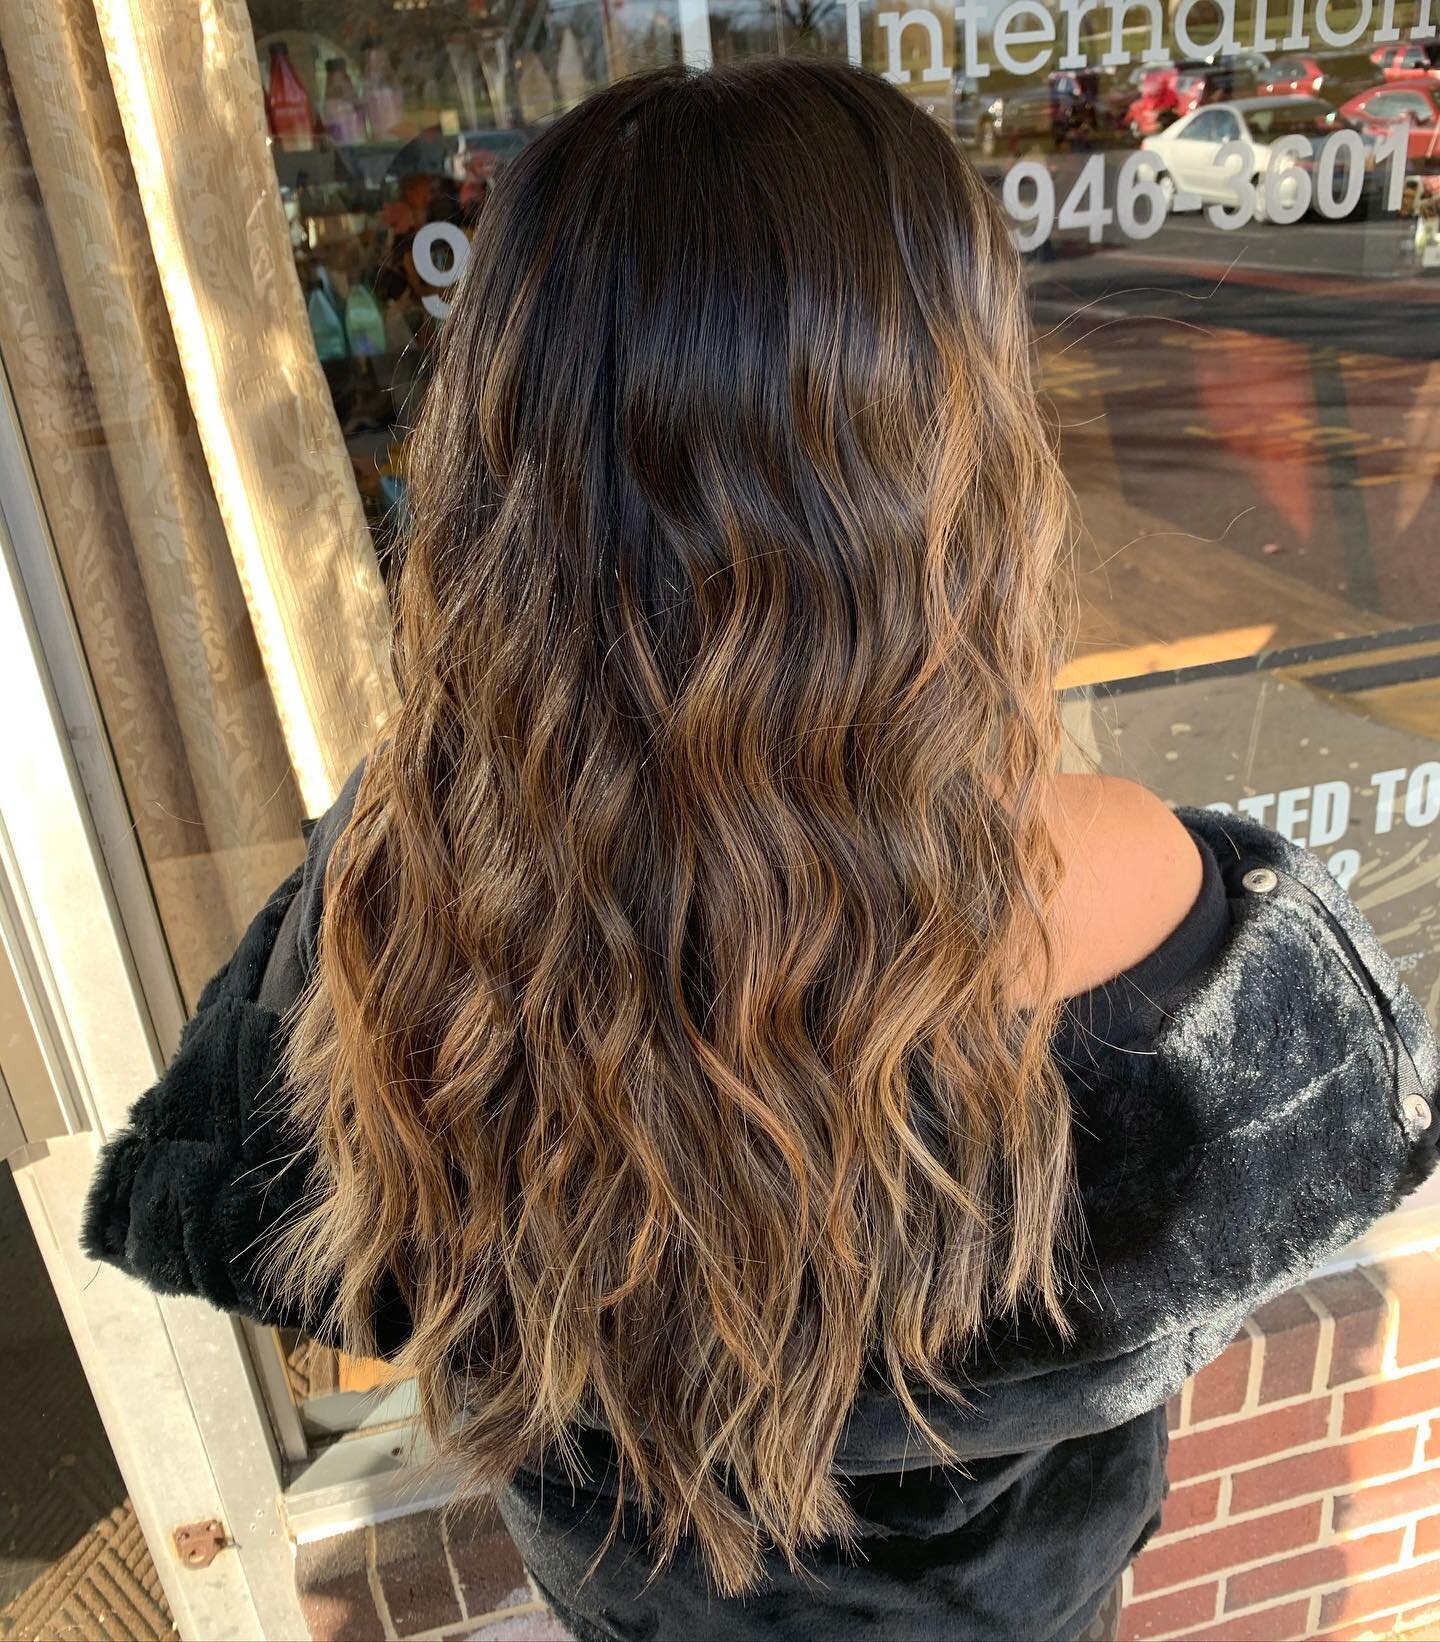 Loving these beach waves
Full head of 18&rdquo; tape-in hair extensions 
✨C O N T A C T✨
For bookings, inquiries &amp; all other info
💌VMbeautyy@gmail.com
.
.
.
.
.
.
#hair #hairextentions #tapeins #wedding #bride #bridal #monmouthcounty #middlesexc